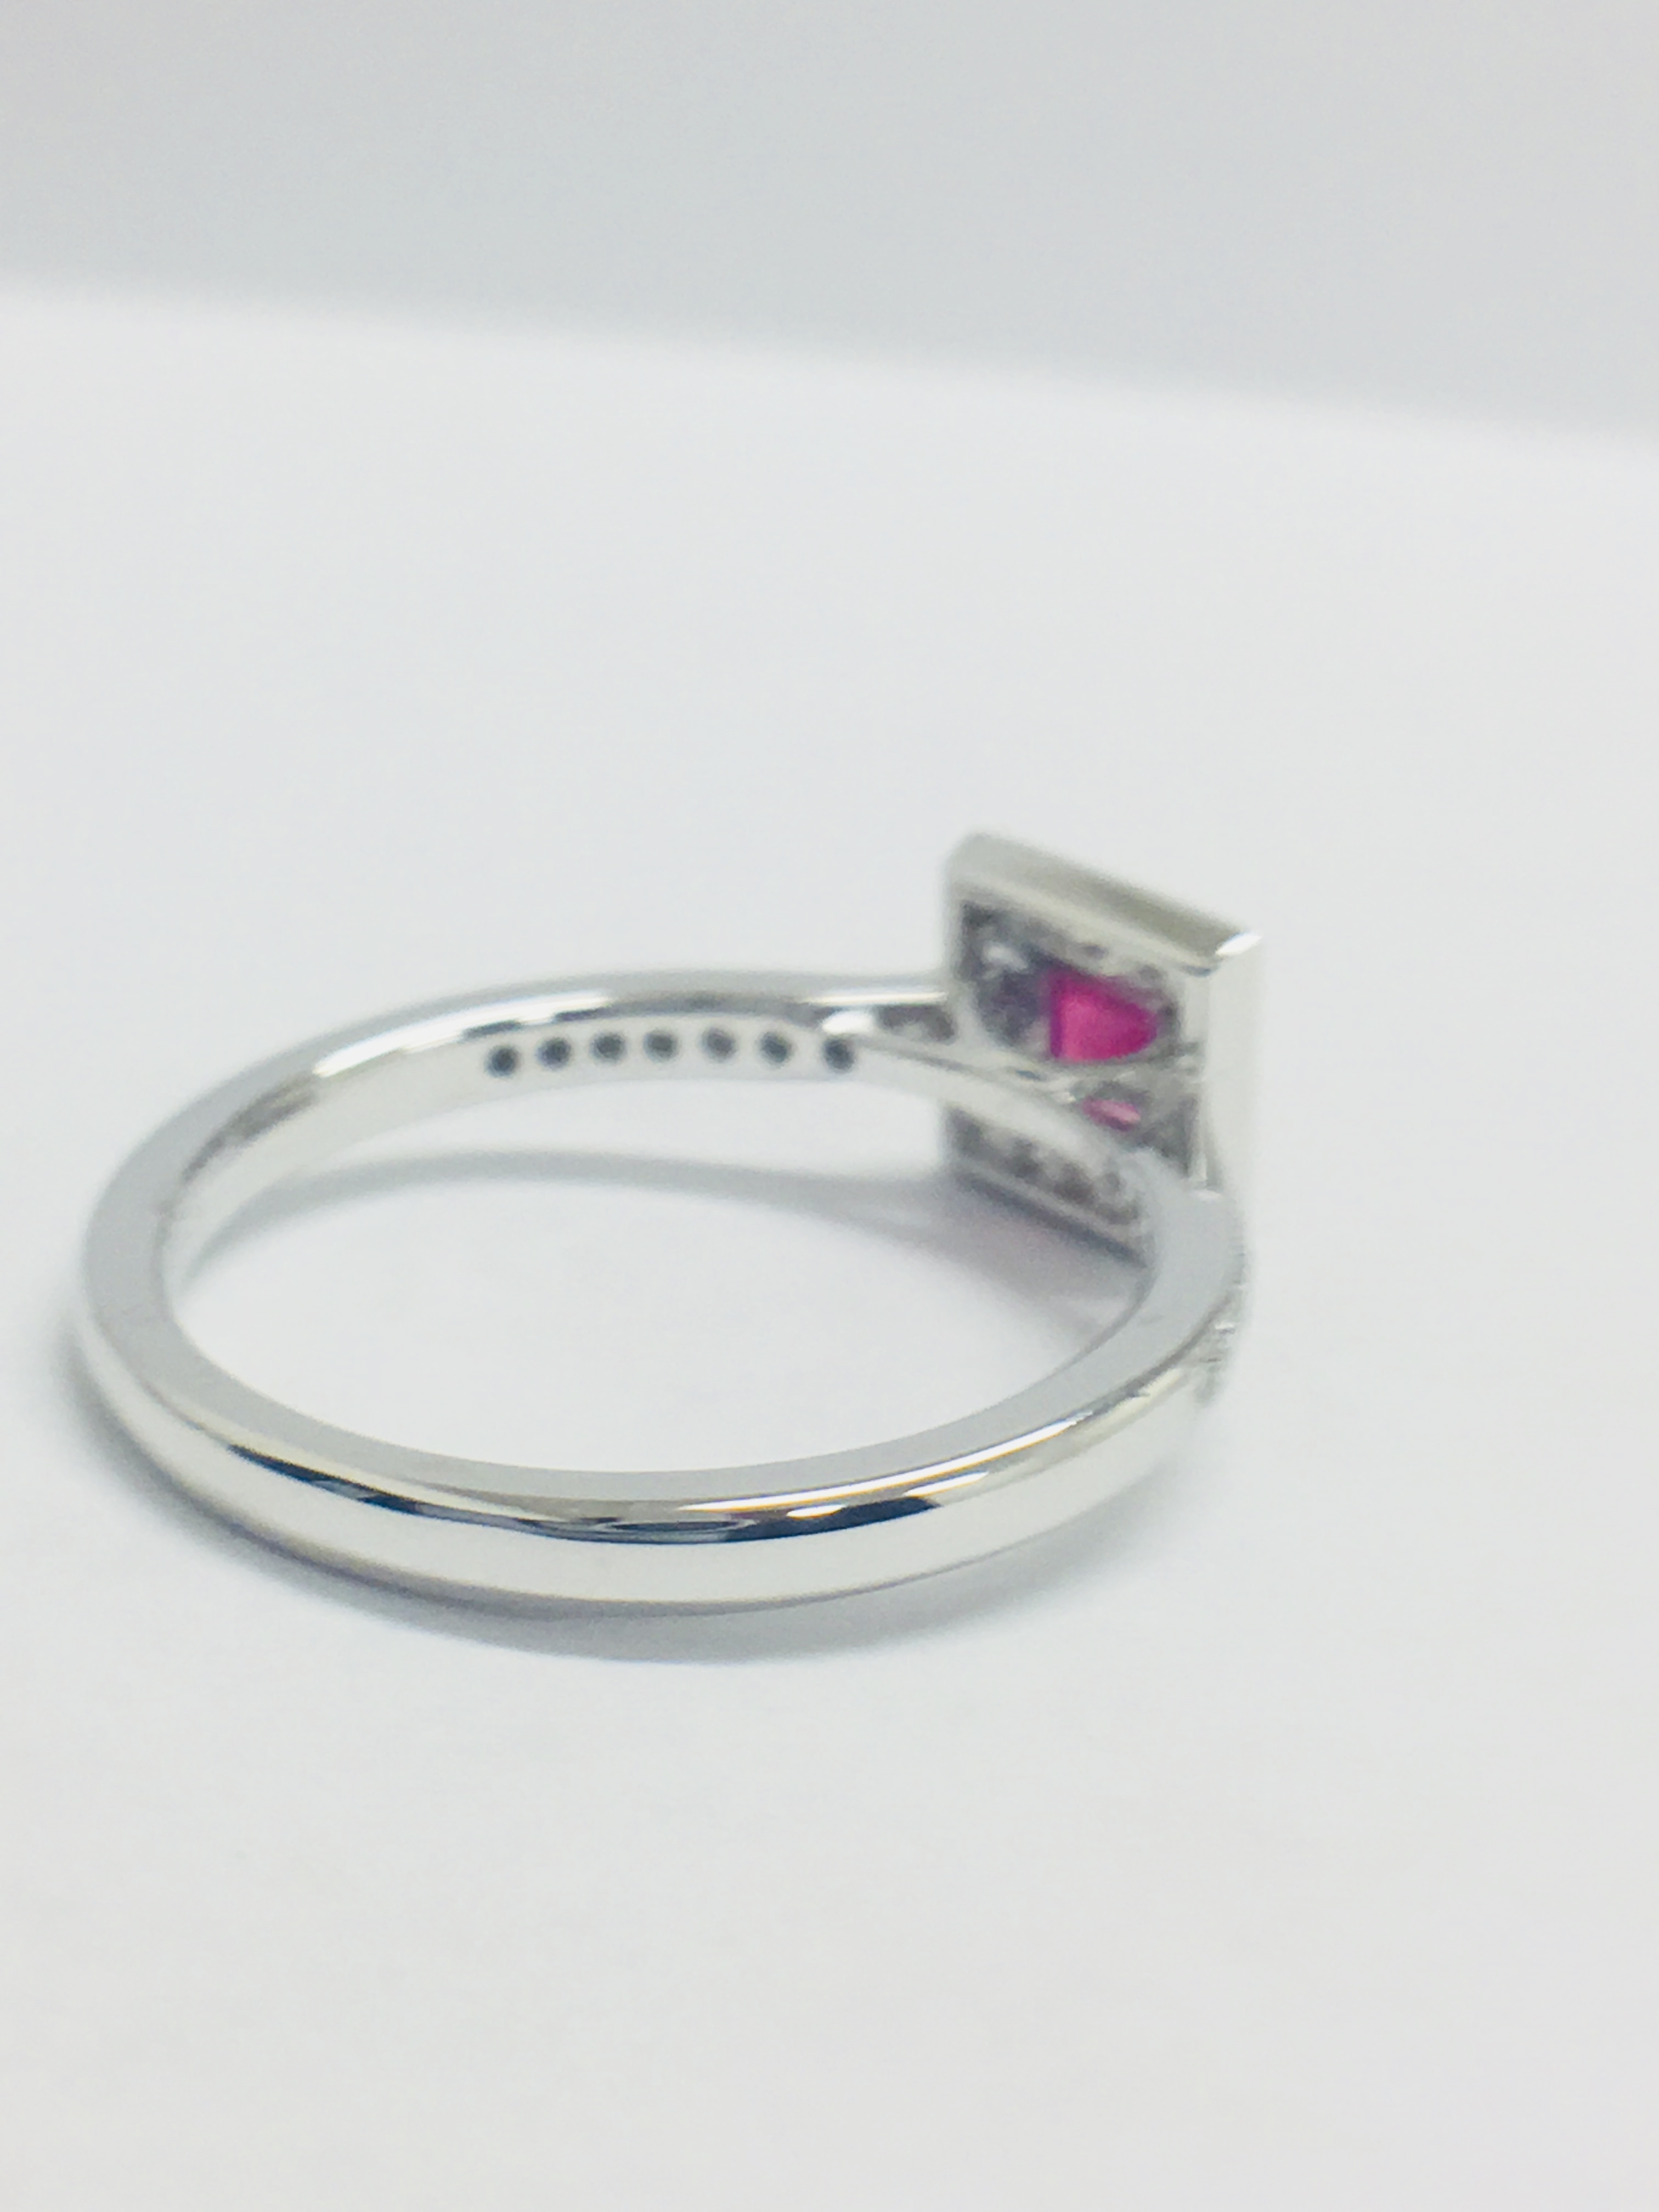 9Ct White Gold Ruby Diamond Cluster Ring, - Image 5 of 8